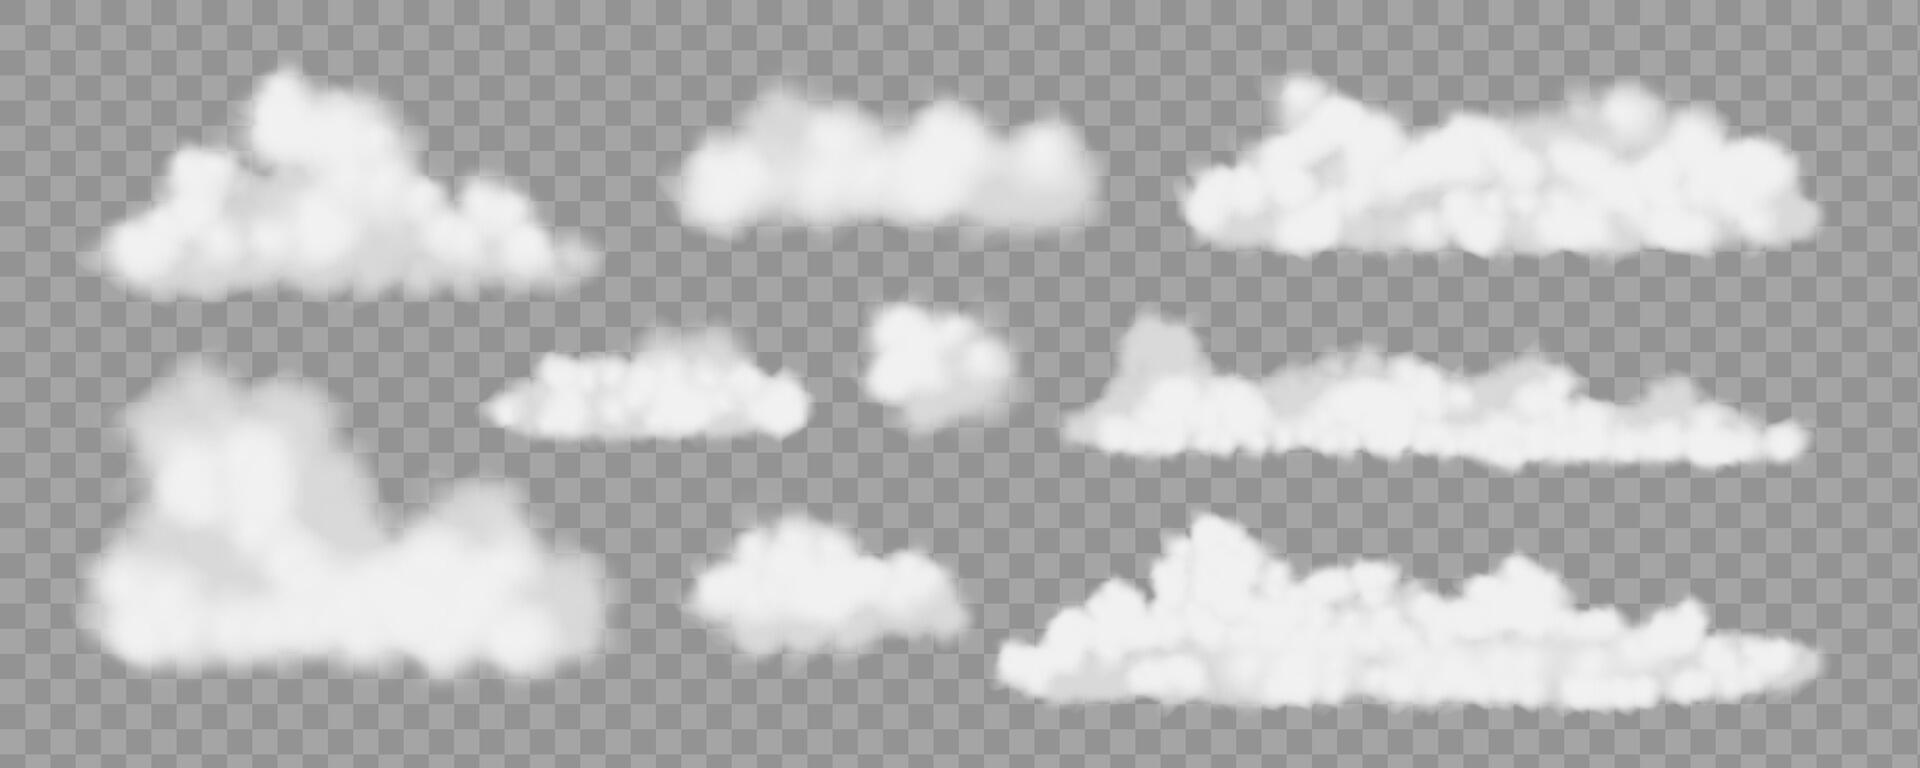 White realistic clouds on transparent cut-out background vector